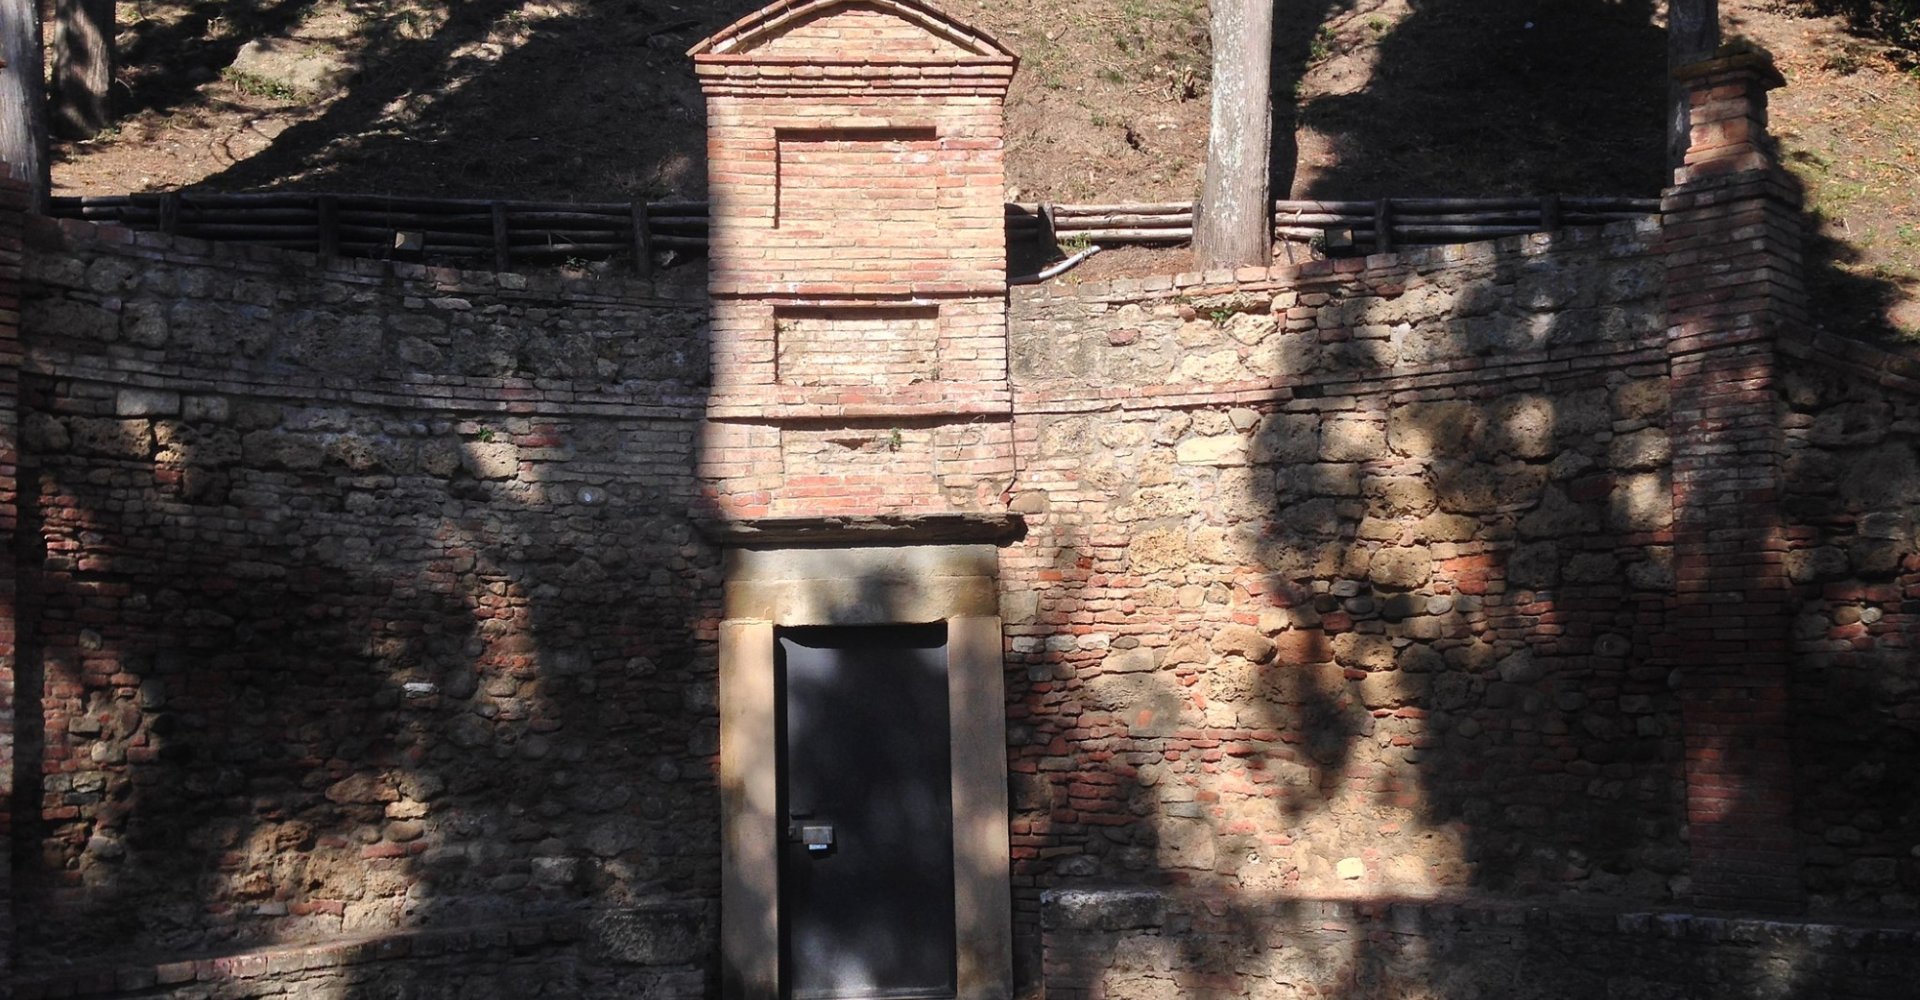 Entrance to the Catacomb of Santa Mustiola in Chiusi